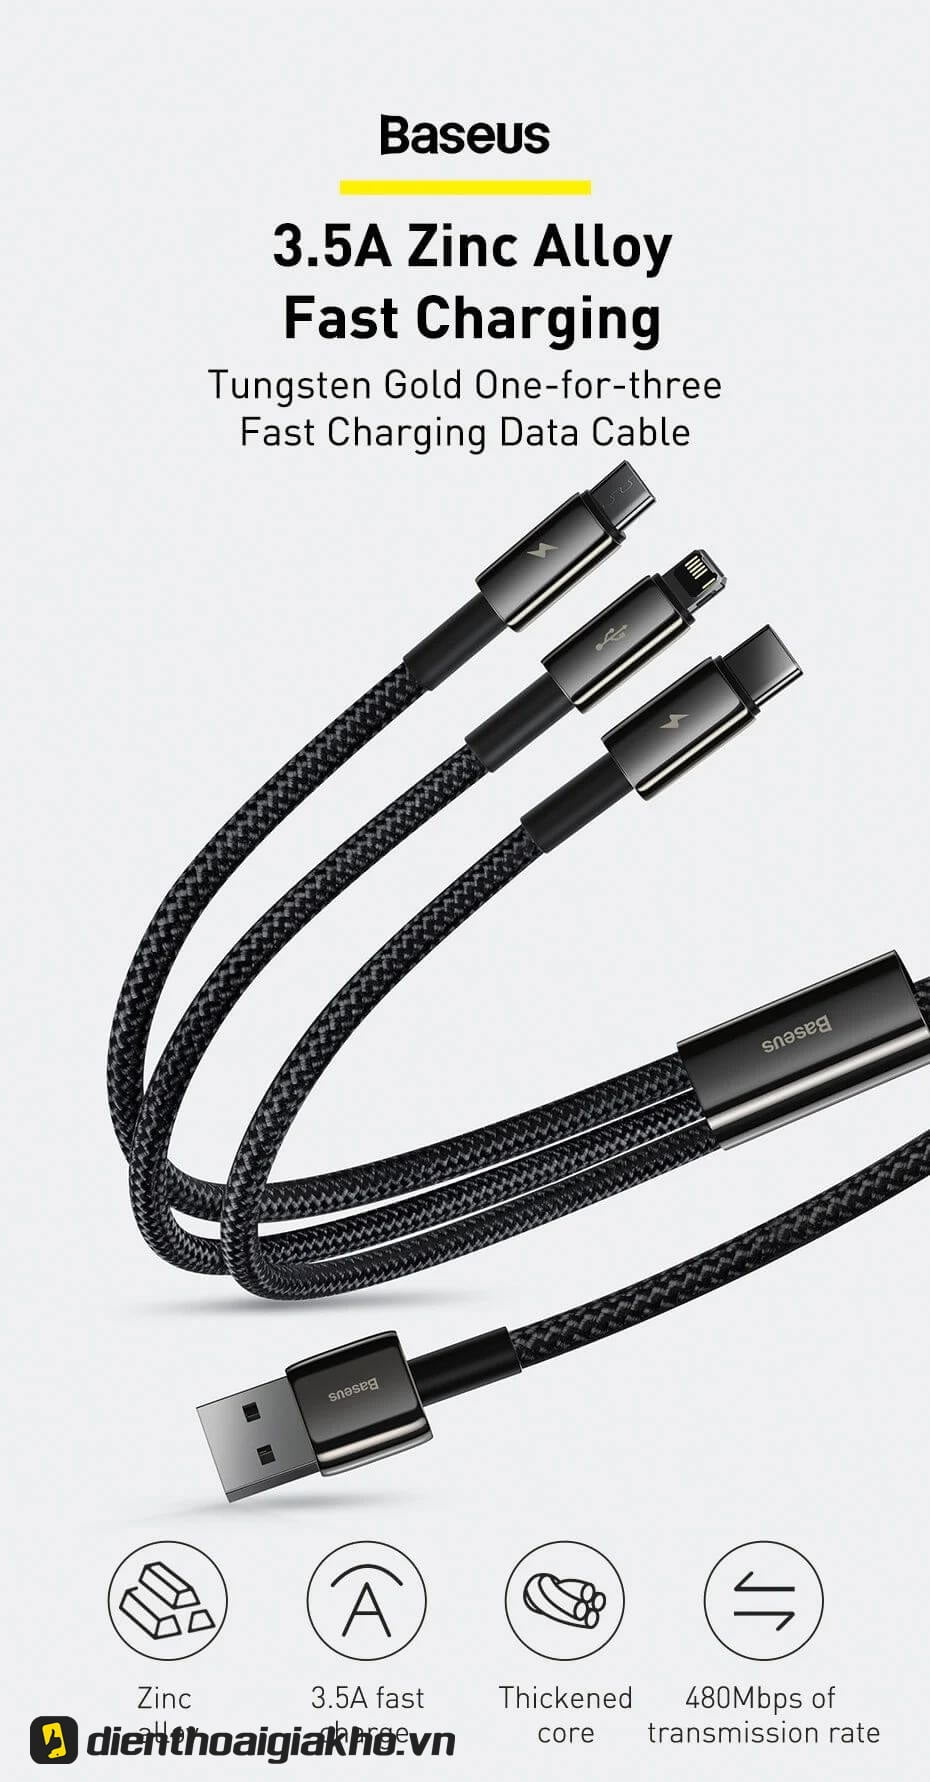 Cáp Baseus Tungsten Gold 3-in-1 Fast Charging USB to M+L+C 3.5A (1.5m)